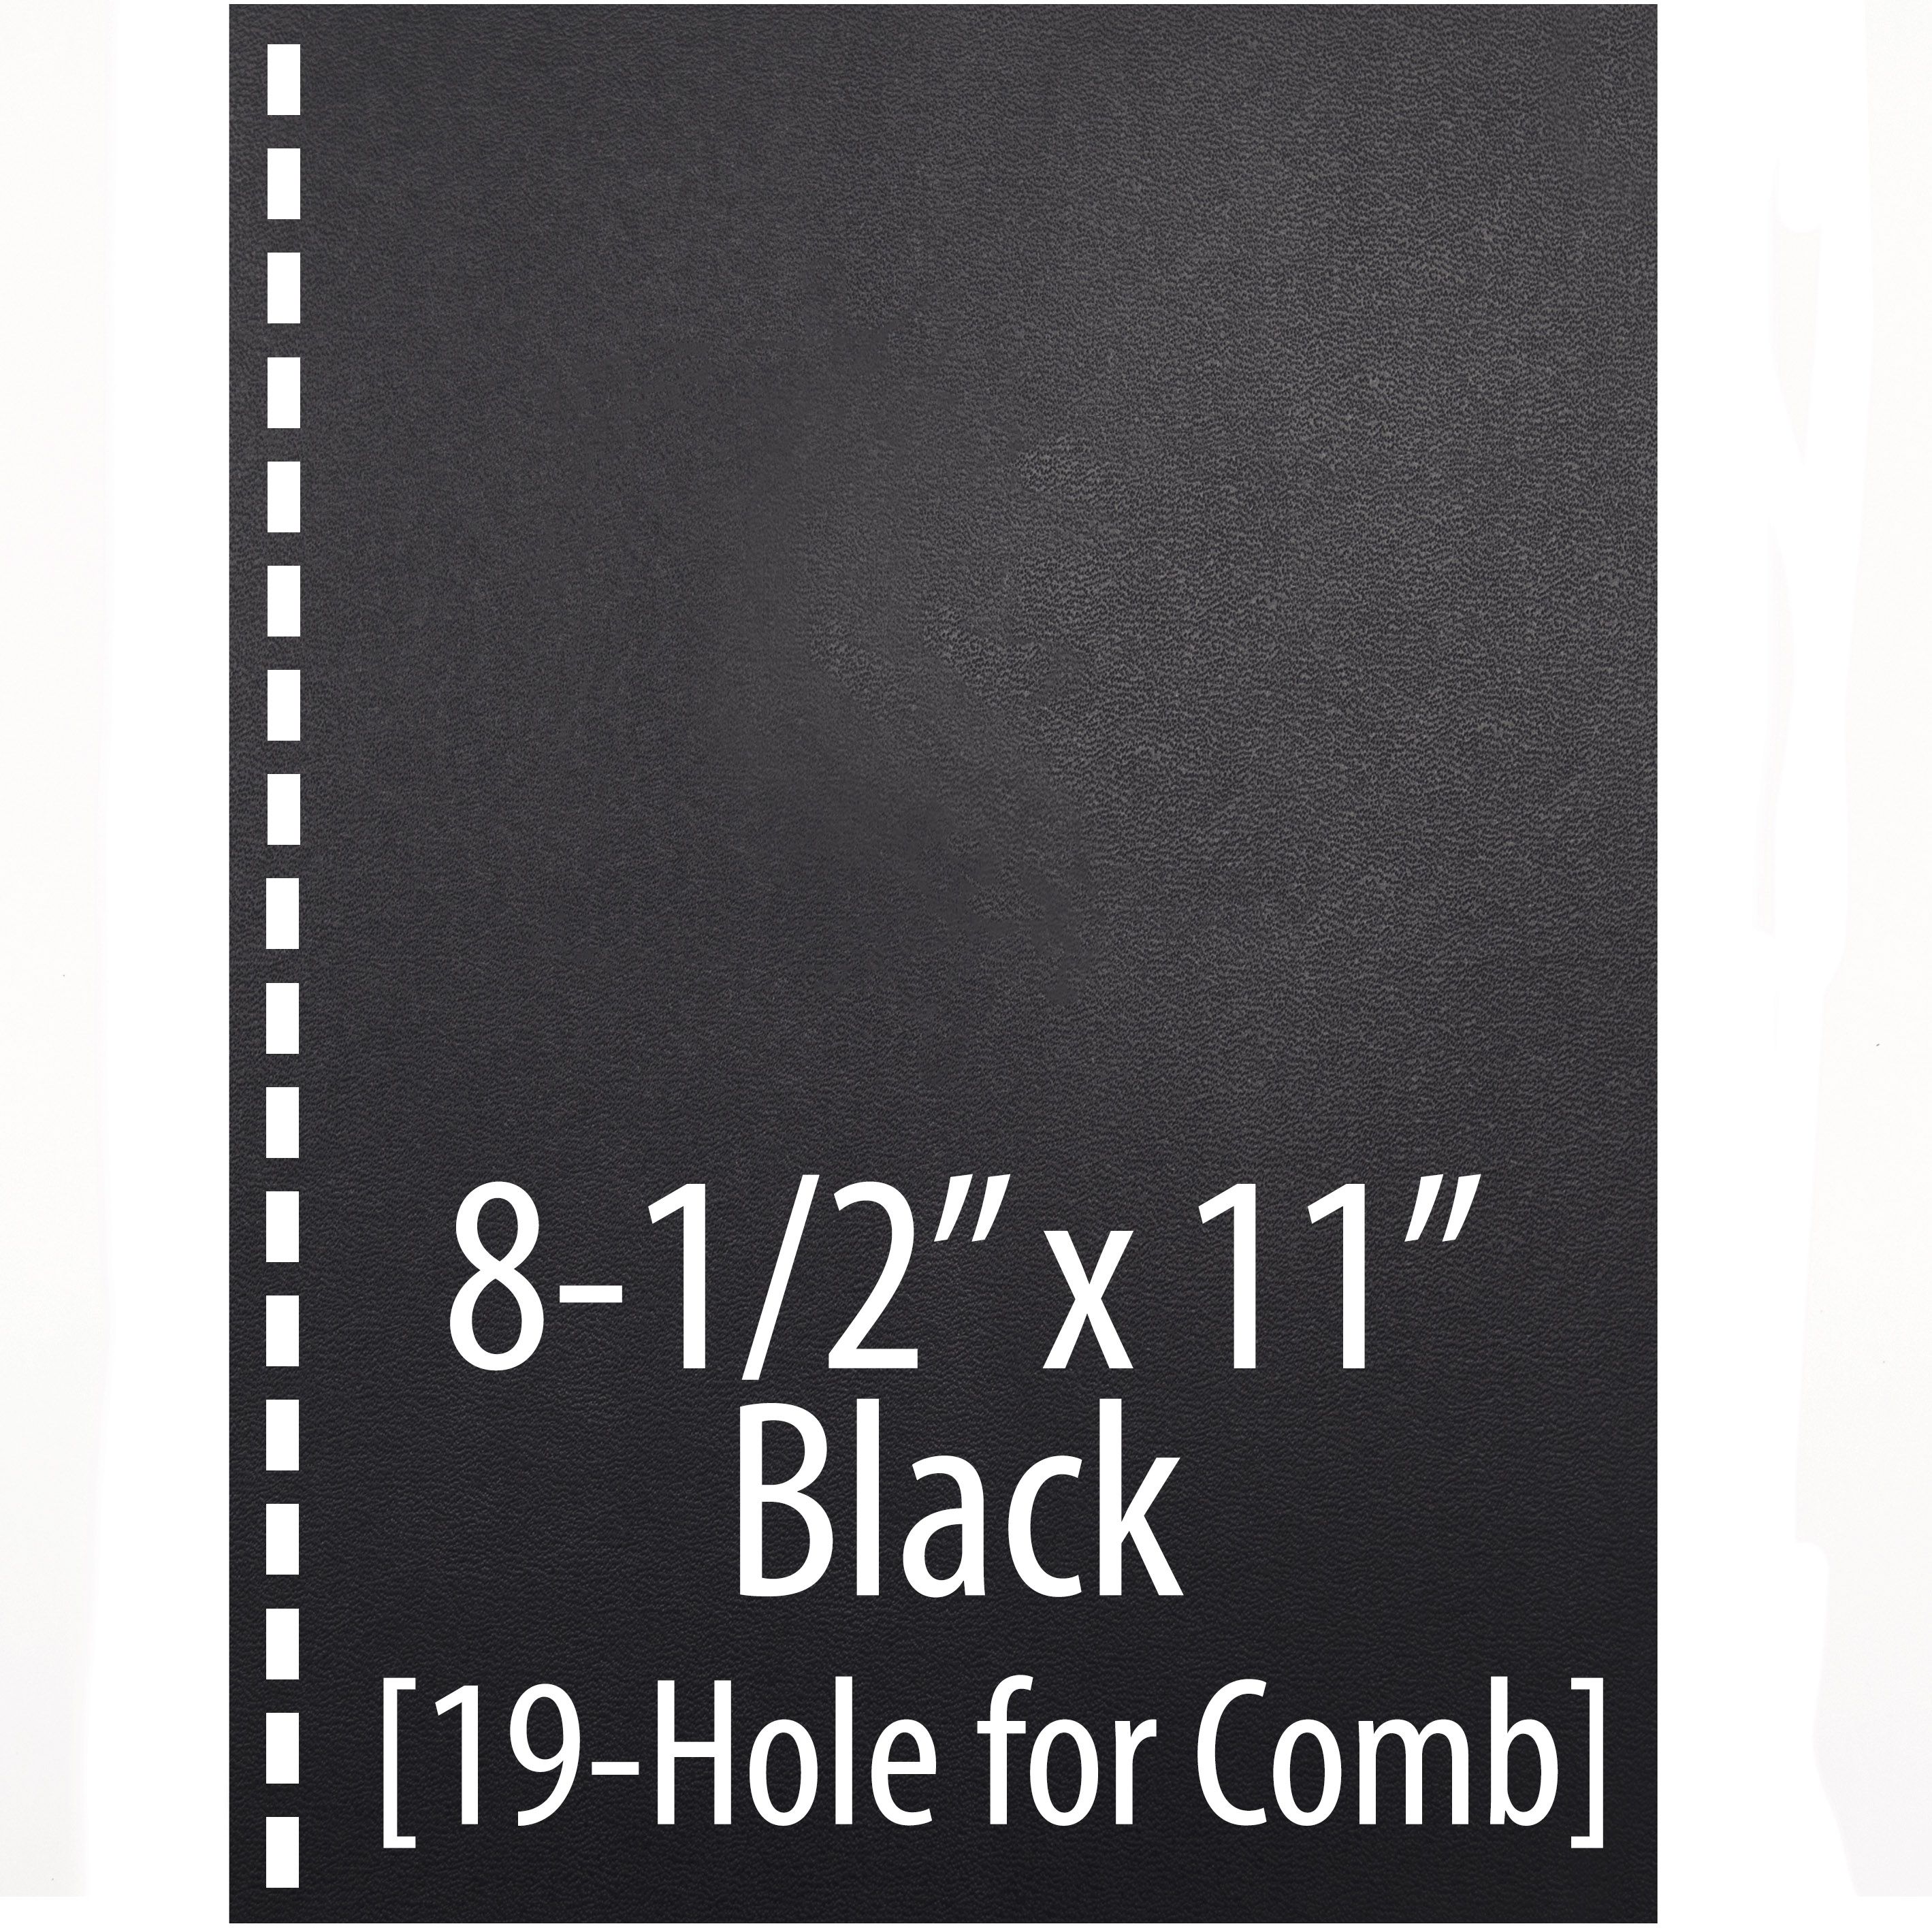 206 Composition Cover [No Window, Square Corner, Black, 19-hole, 8-1/2" X 11"] 100 /Pack